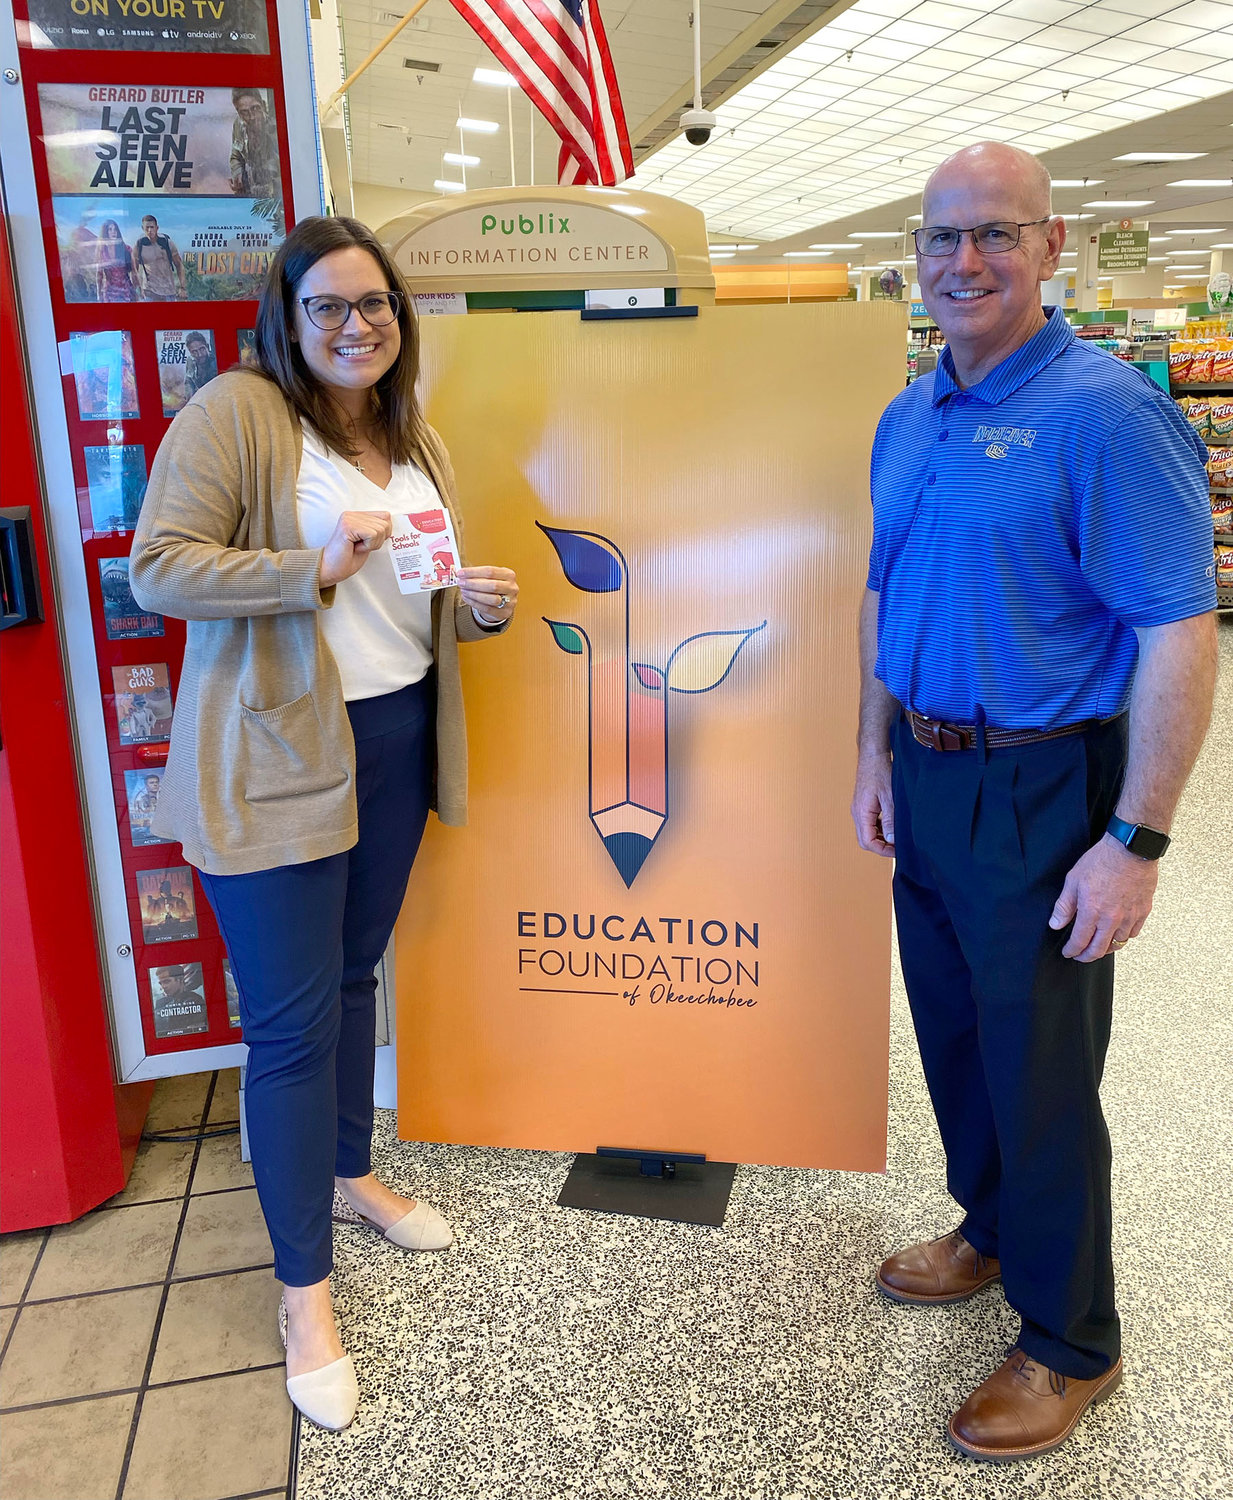 Education Foundation of Okeechobee stakeholders Christine Brennan Bishop and Russ Brown greet Publix’s customers during the Tools for Back to School campaign.